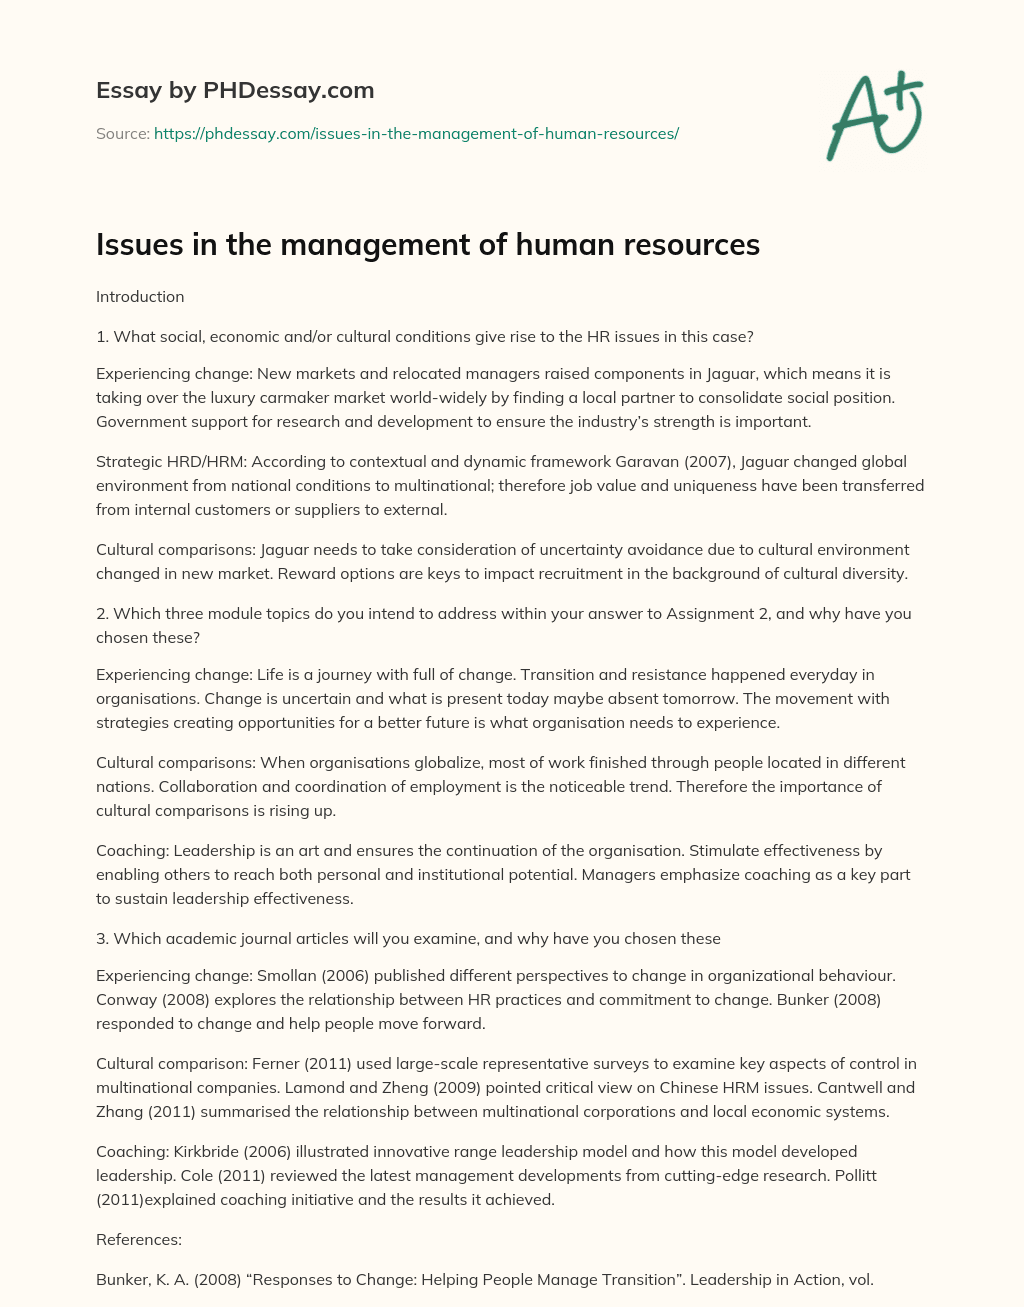 Issues in the management of human resources essay